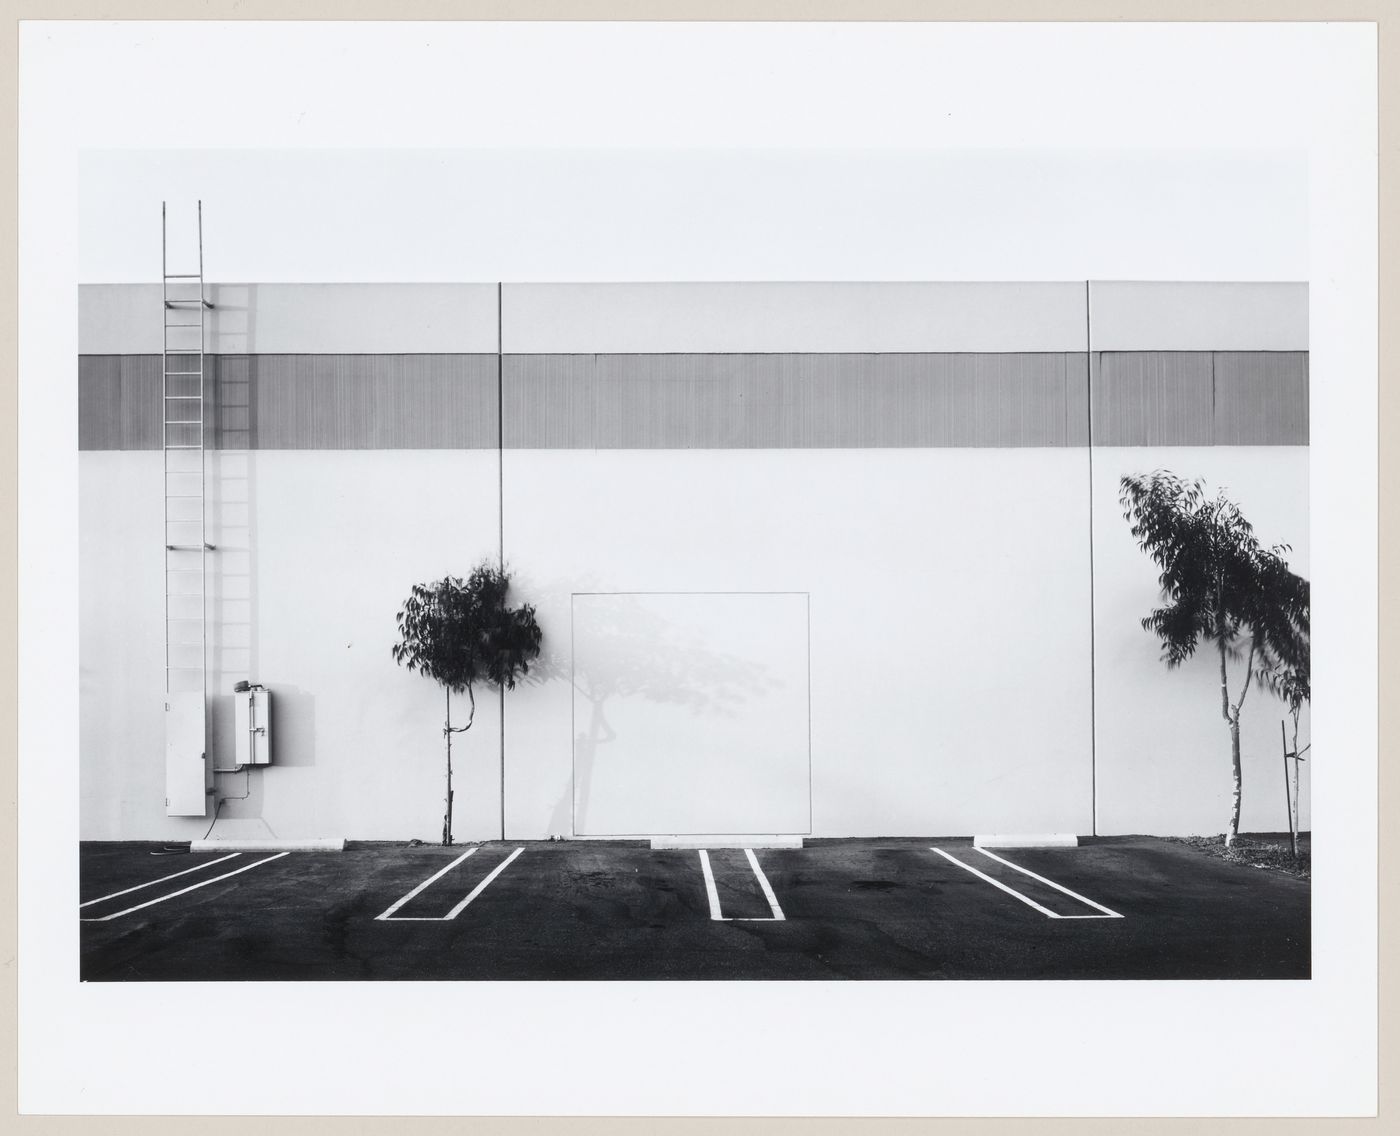 View of the south wall of Semicoa, 333 McCormick, Costa Mesa, California, United States, from the series “The new Industrial Parks near Irvine, California”